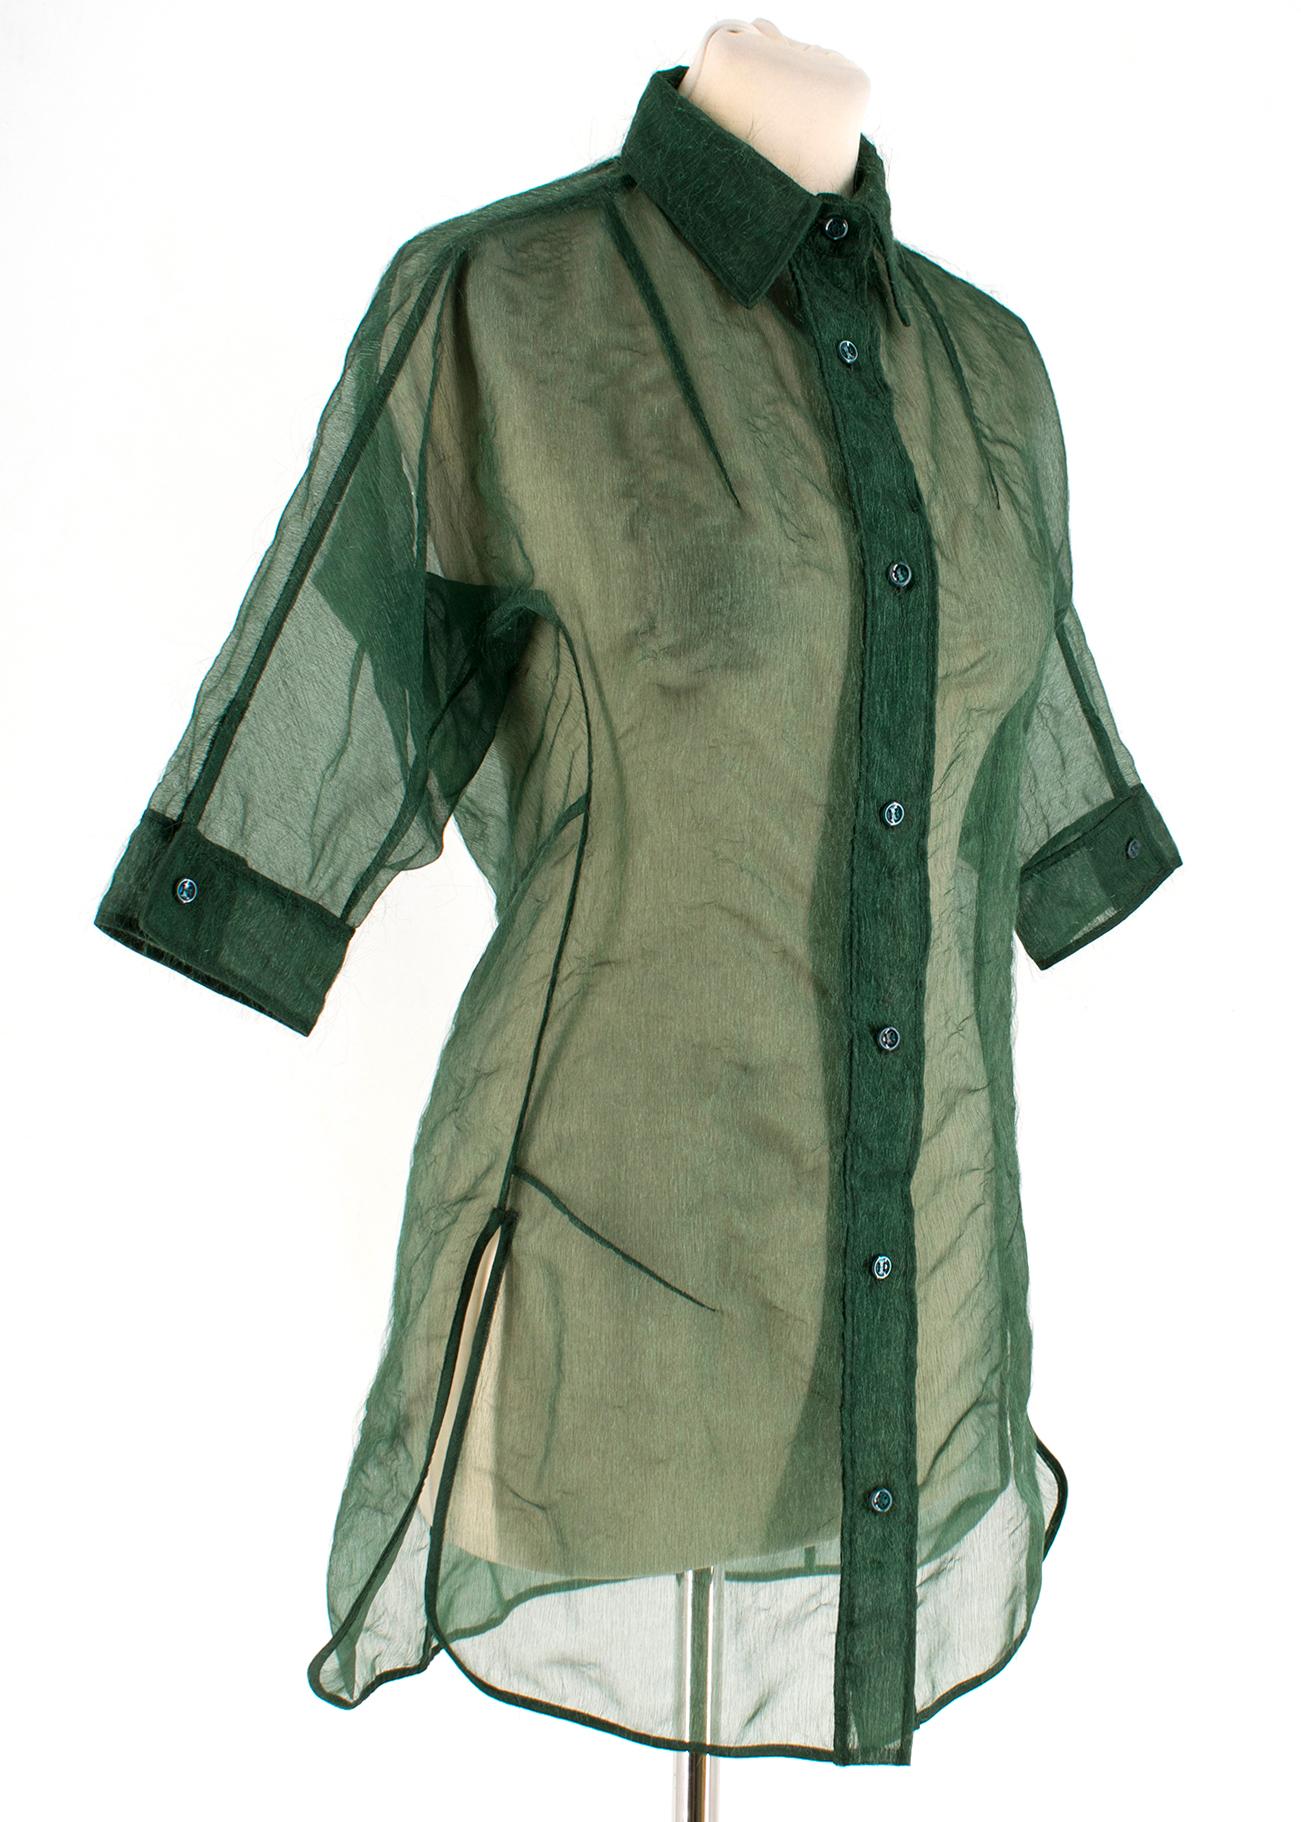 Yves Saint Laurent Rive Gauche Green Fitted Organza Blouse with fraying effect

- Made in France

Please note, these items are pre-owned and may show signs of being stored even when unworn and unused. This is reflected within the significantly